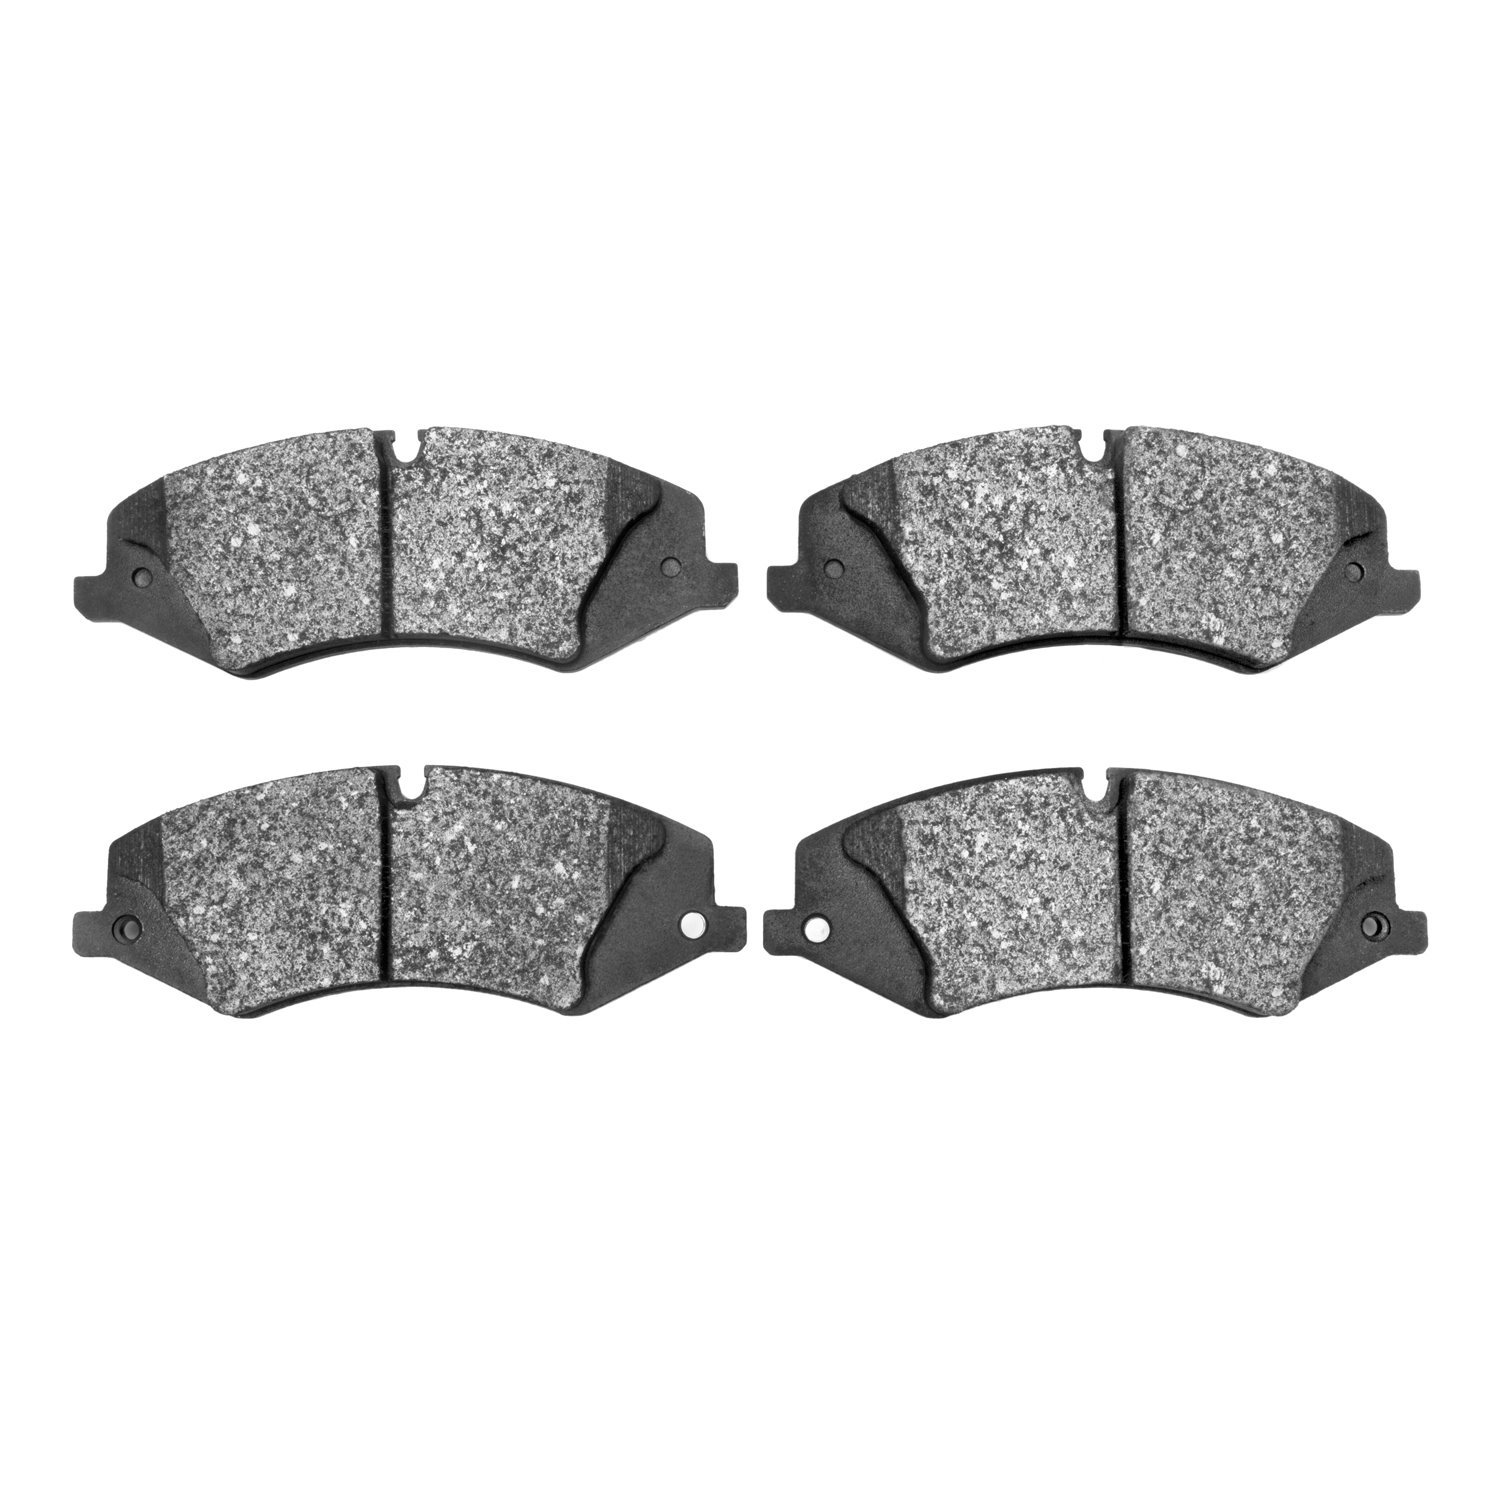 1600-1479-00 5000 Euro Ceramic Brake Pads, 2010-2017 Land Rover, Position: Front